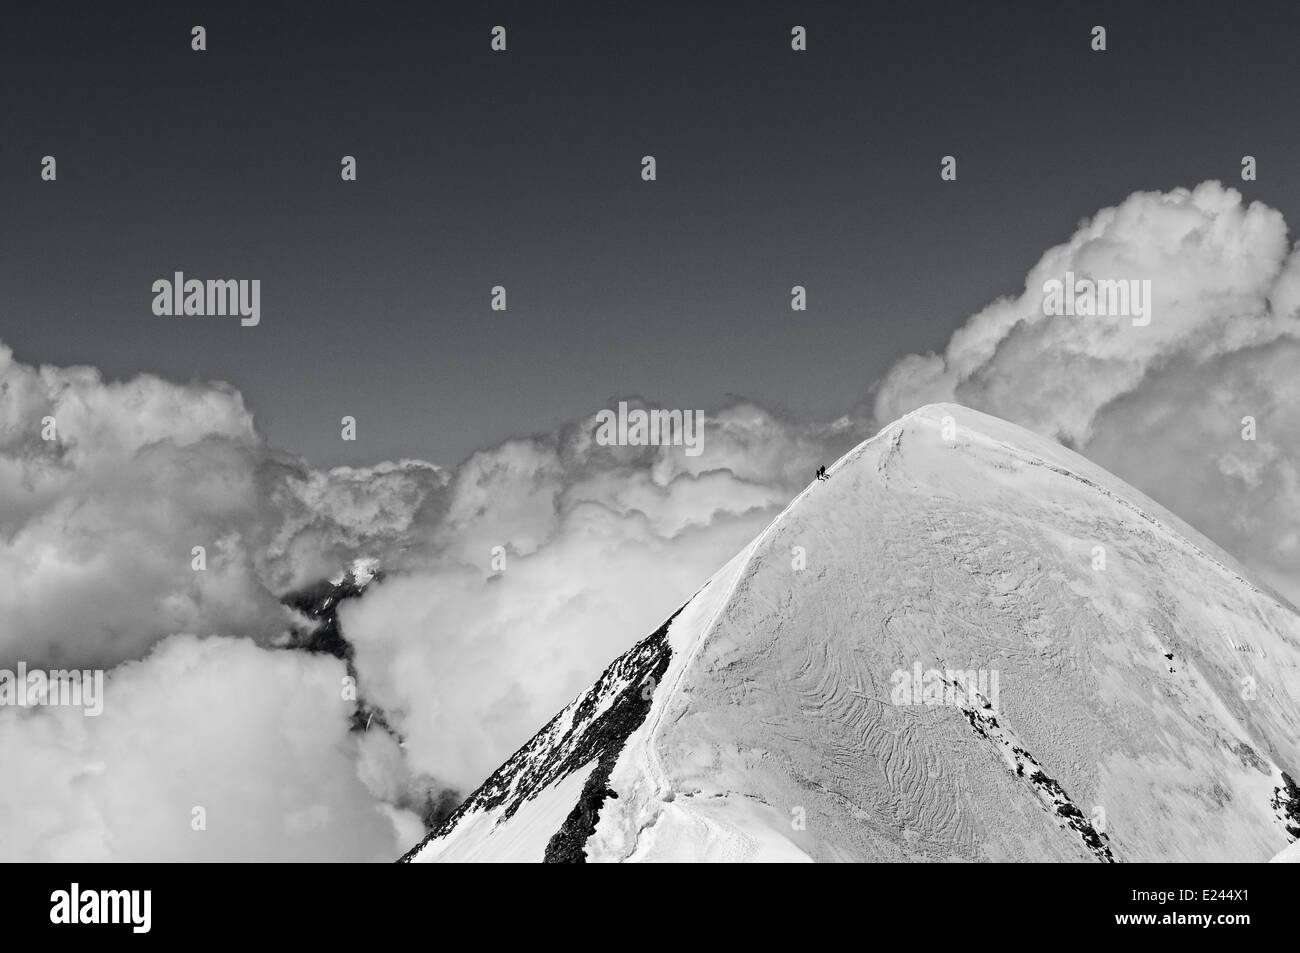 Climbers on the superb airy traverse of the Breithorn in the Swiss Alps Stock Photo